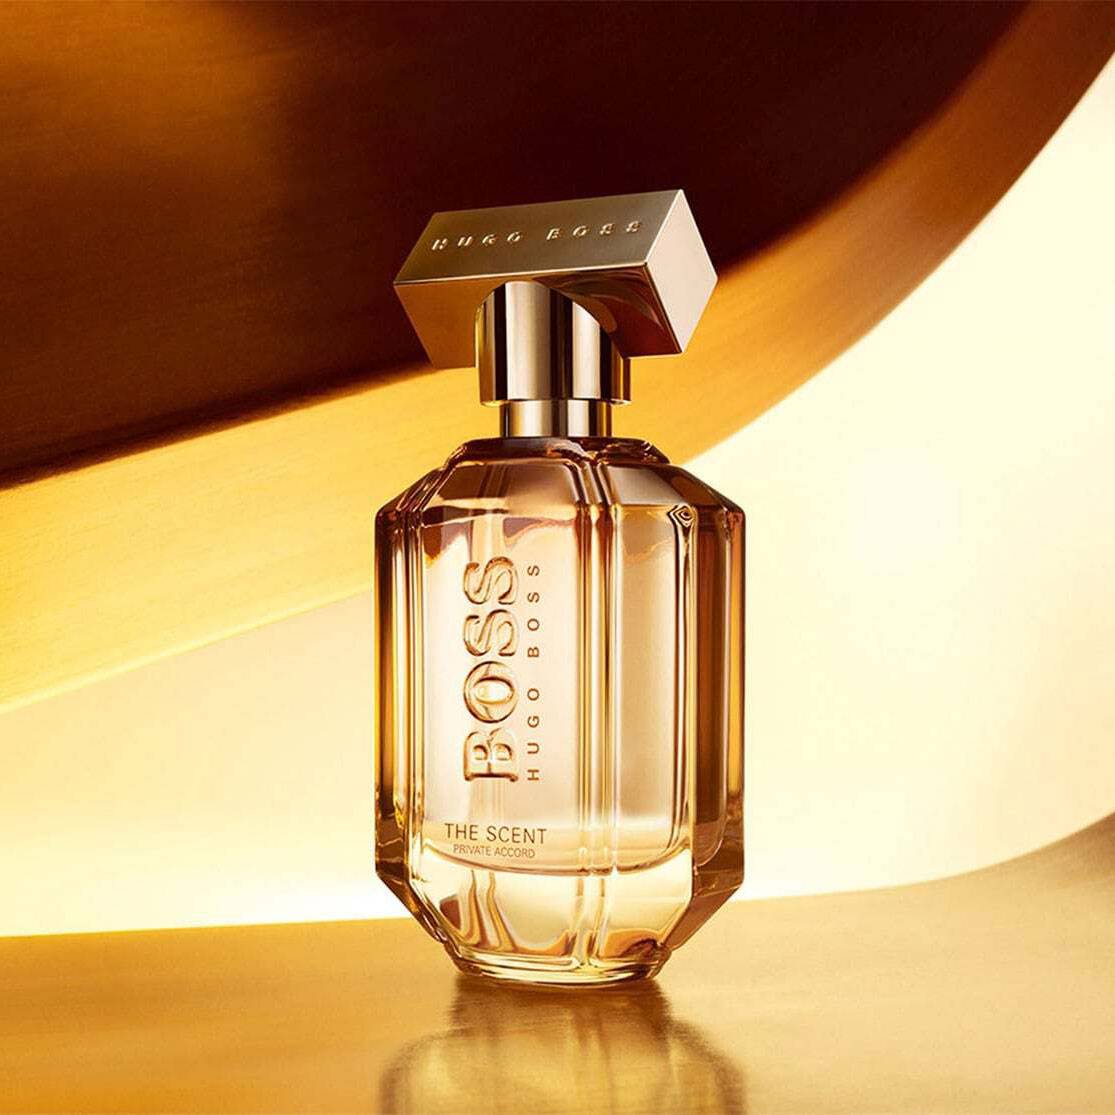 Хуго босс сент. Hugo Boss the Scent private Accord for her EDP. Hugo Boss the Scent privat Accord. Hugo Boss the Scent private Accord for him 100 ml. Hugo Boss the Scent private Accord женские.